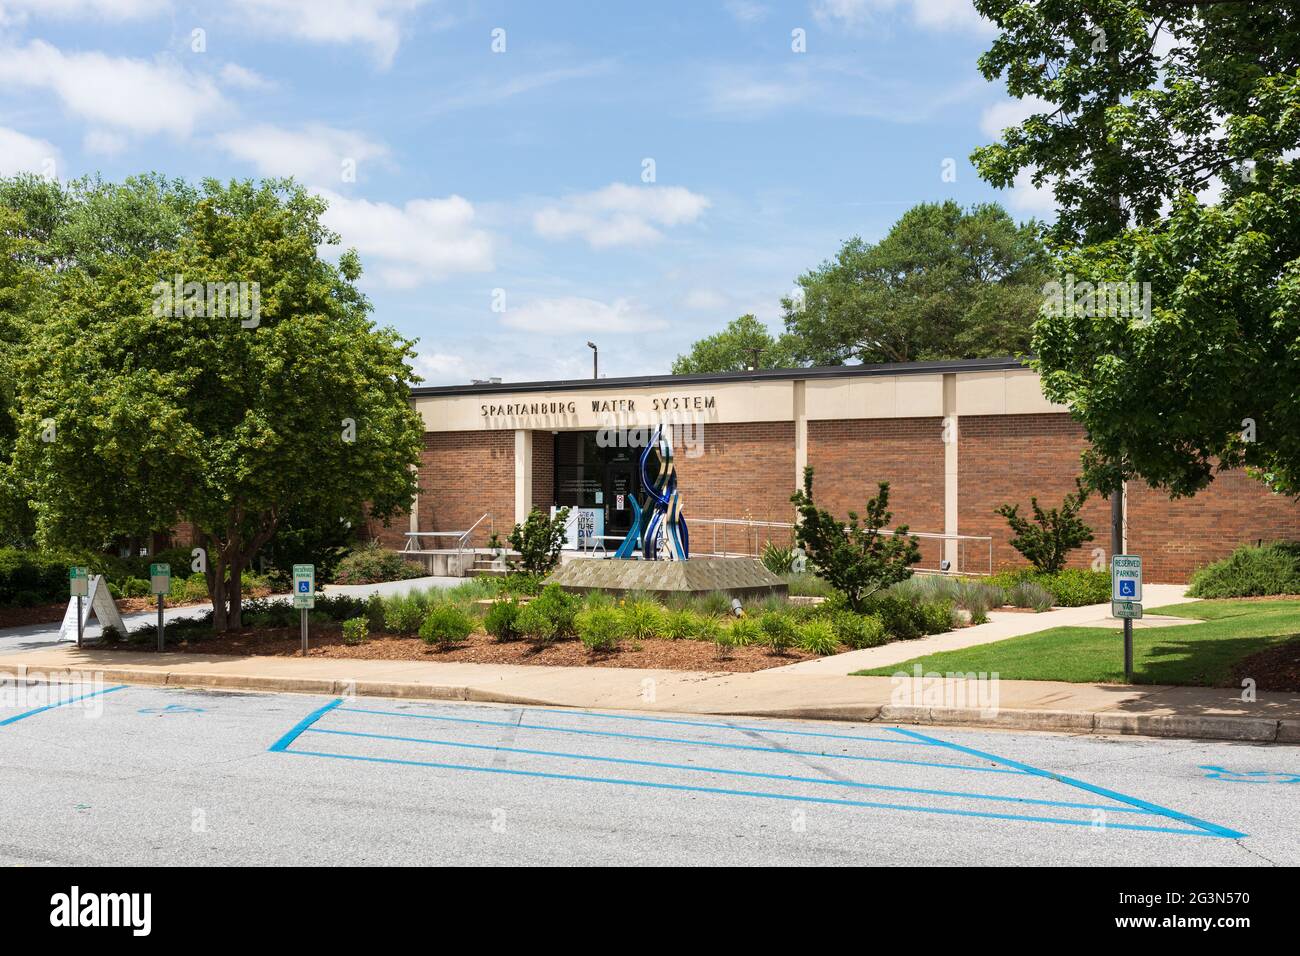 SPARTANBURG, SC, USA-13 JUNE 2021: Building housing the Spartanburg Water System offices Horizontal image. Stock Photo